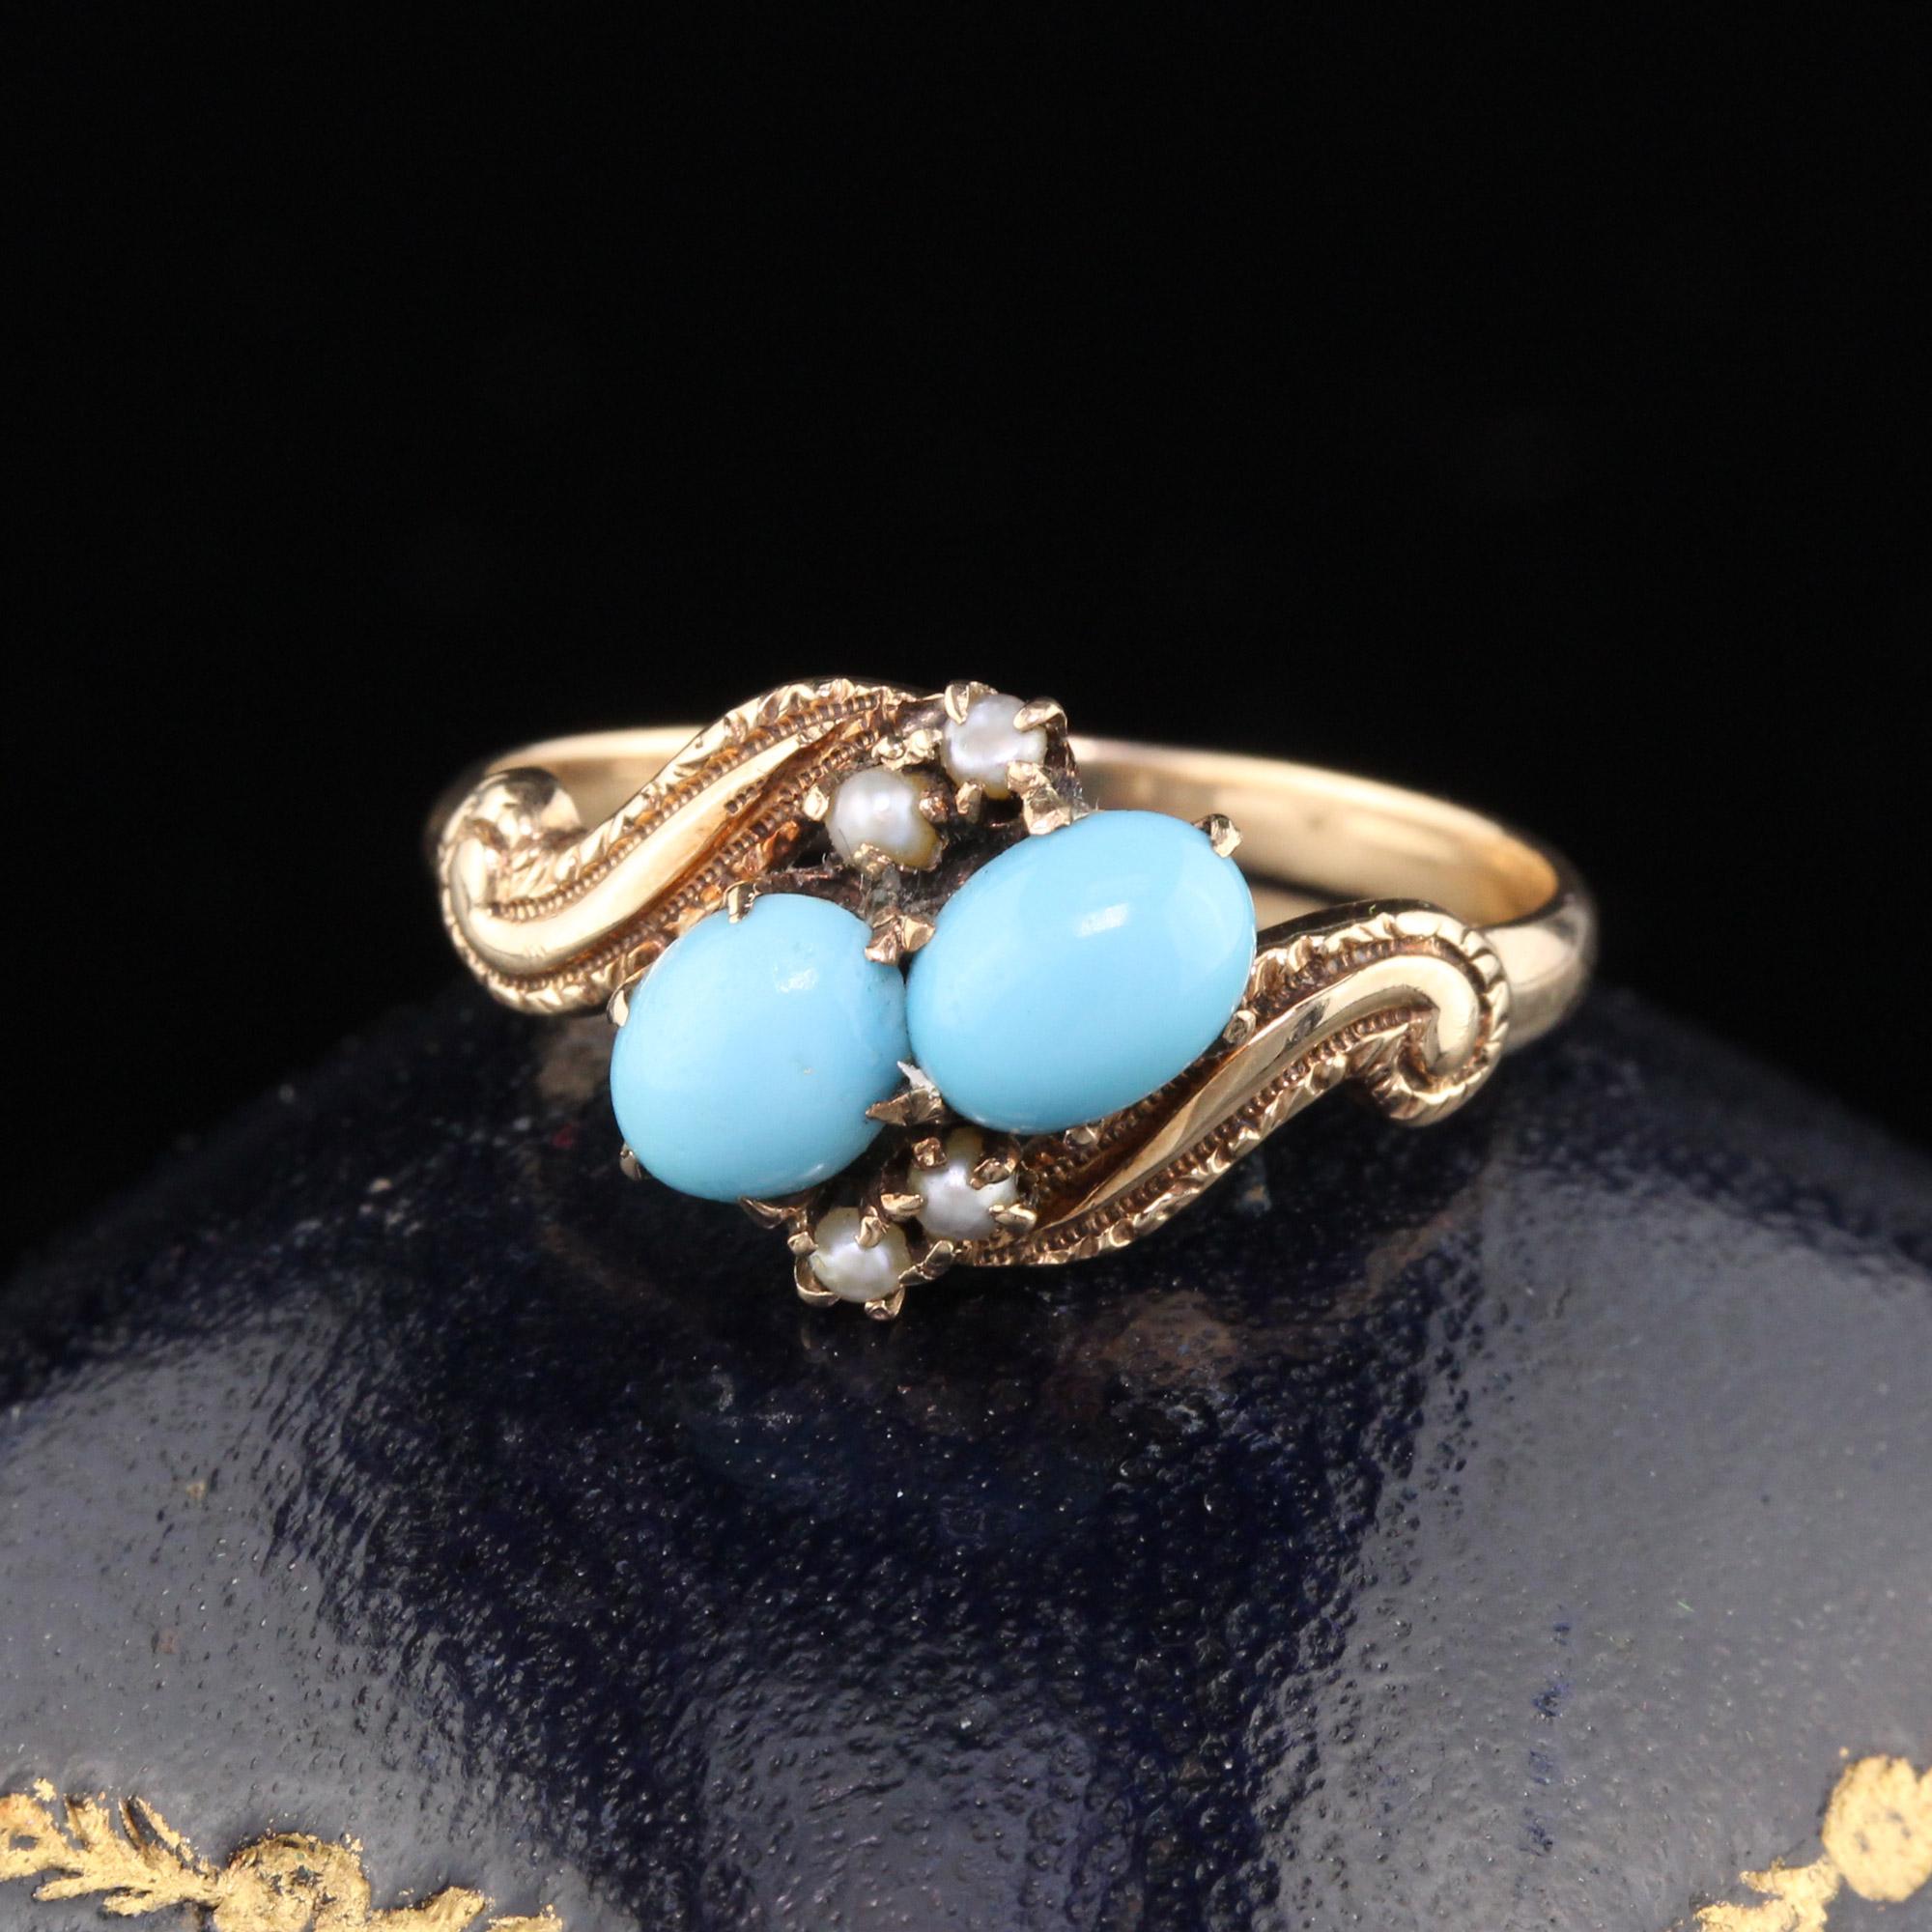 Victorian 10K Yellow Gold 'Toi et Moi' Ring with two oval turquoises and 2 seed pearls on each side. In excellent condition.

#R0179

Metal: 10K Yellow Gold 

Weight: 2.5 Grams

Turquoise Measurements: Approximately 6 x 4.5 mm

Ring Size: 7